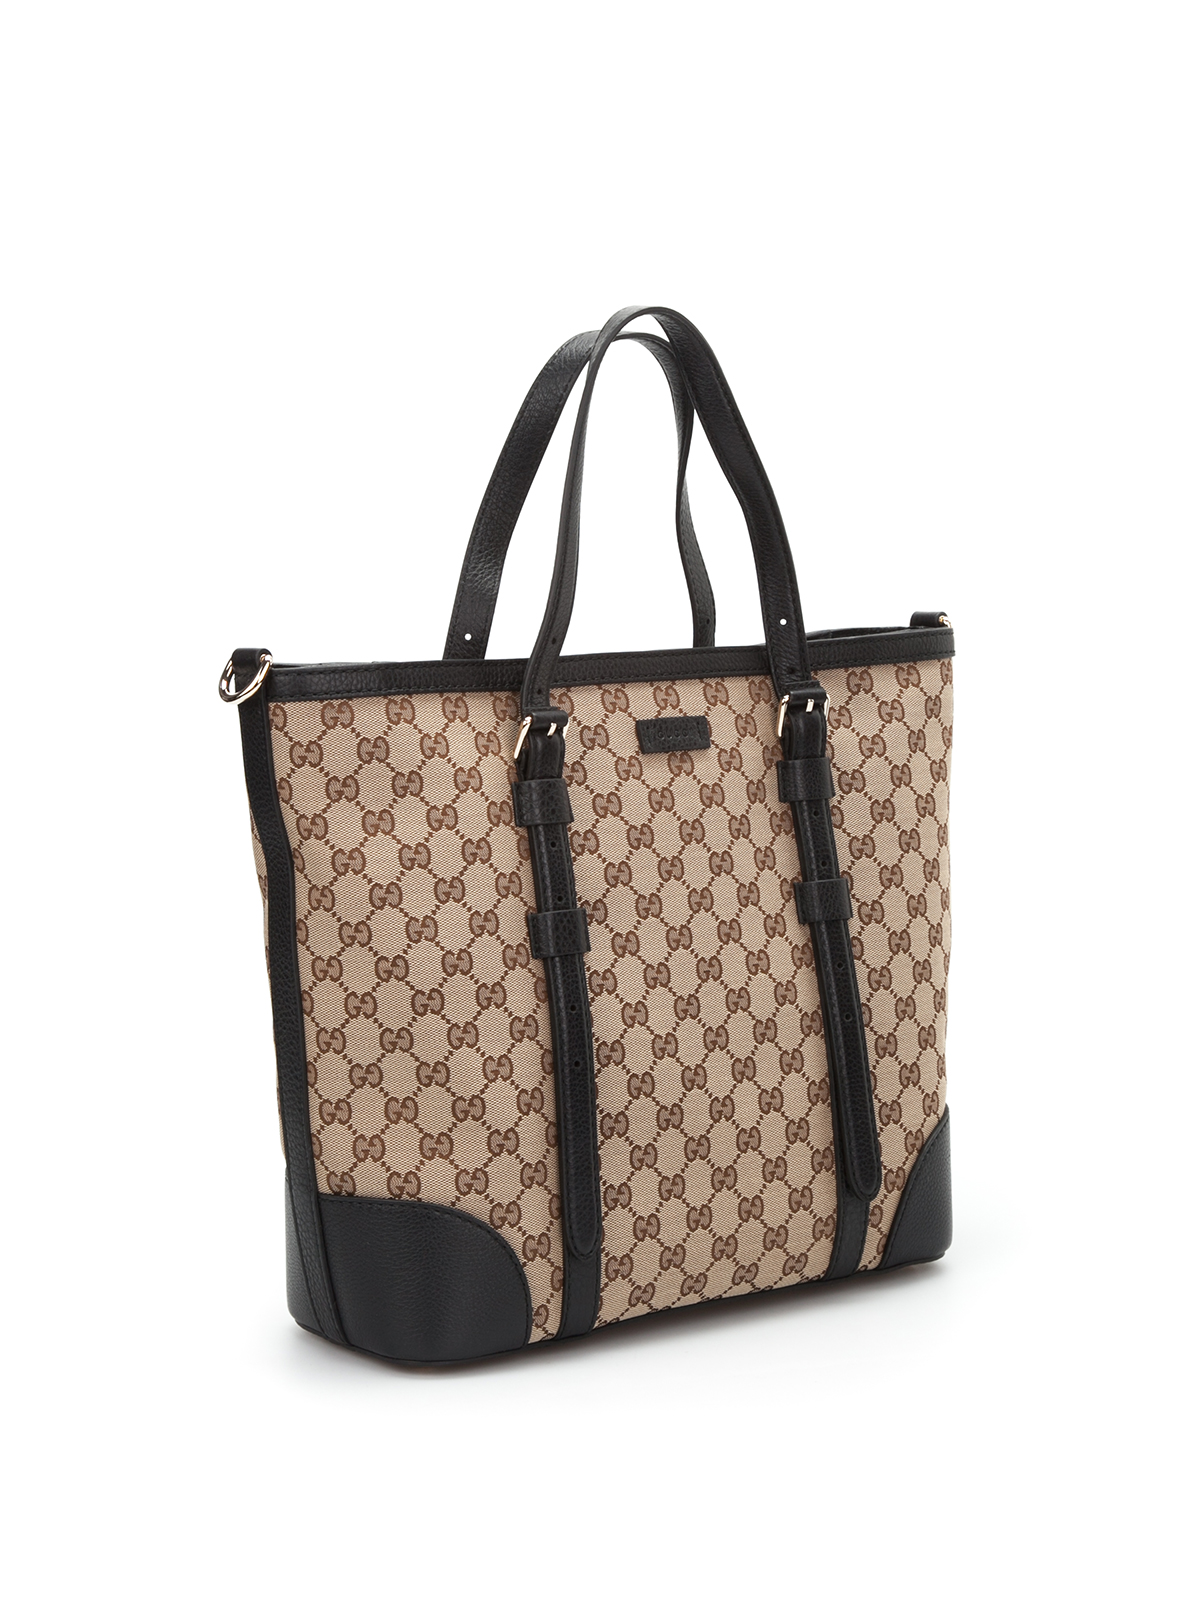 GG classic tote by Gucci - totes bags | Shop online at www.lvspeedy30.com - 387602 KQW1G 9769